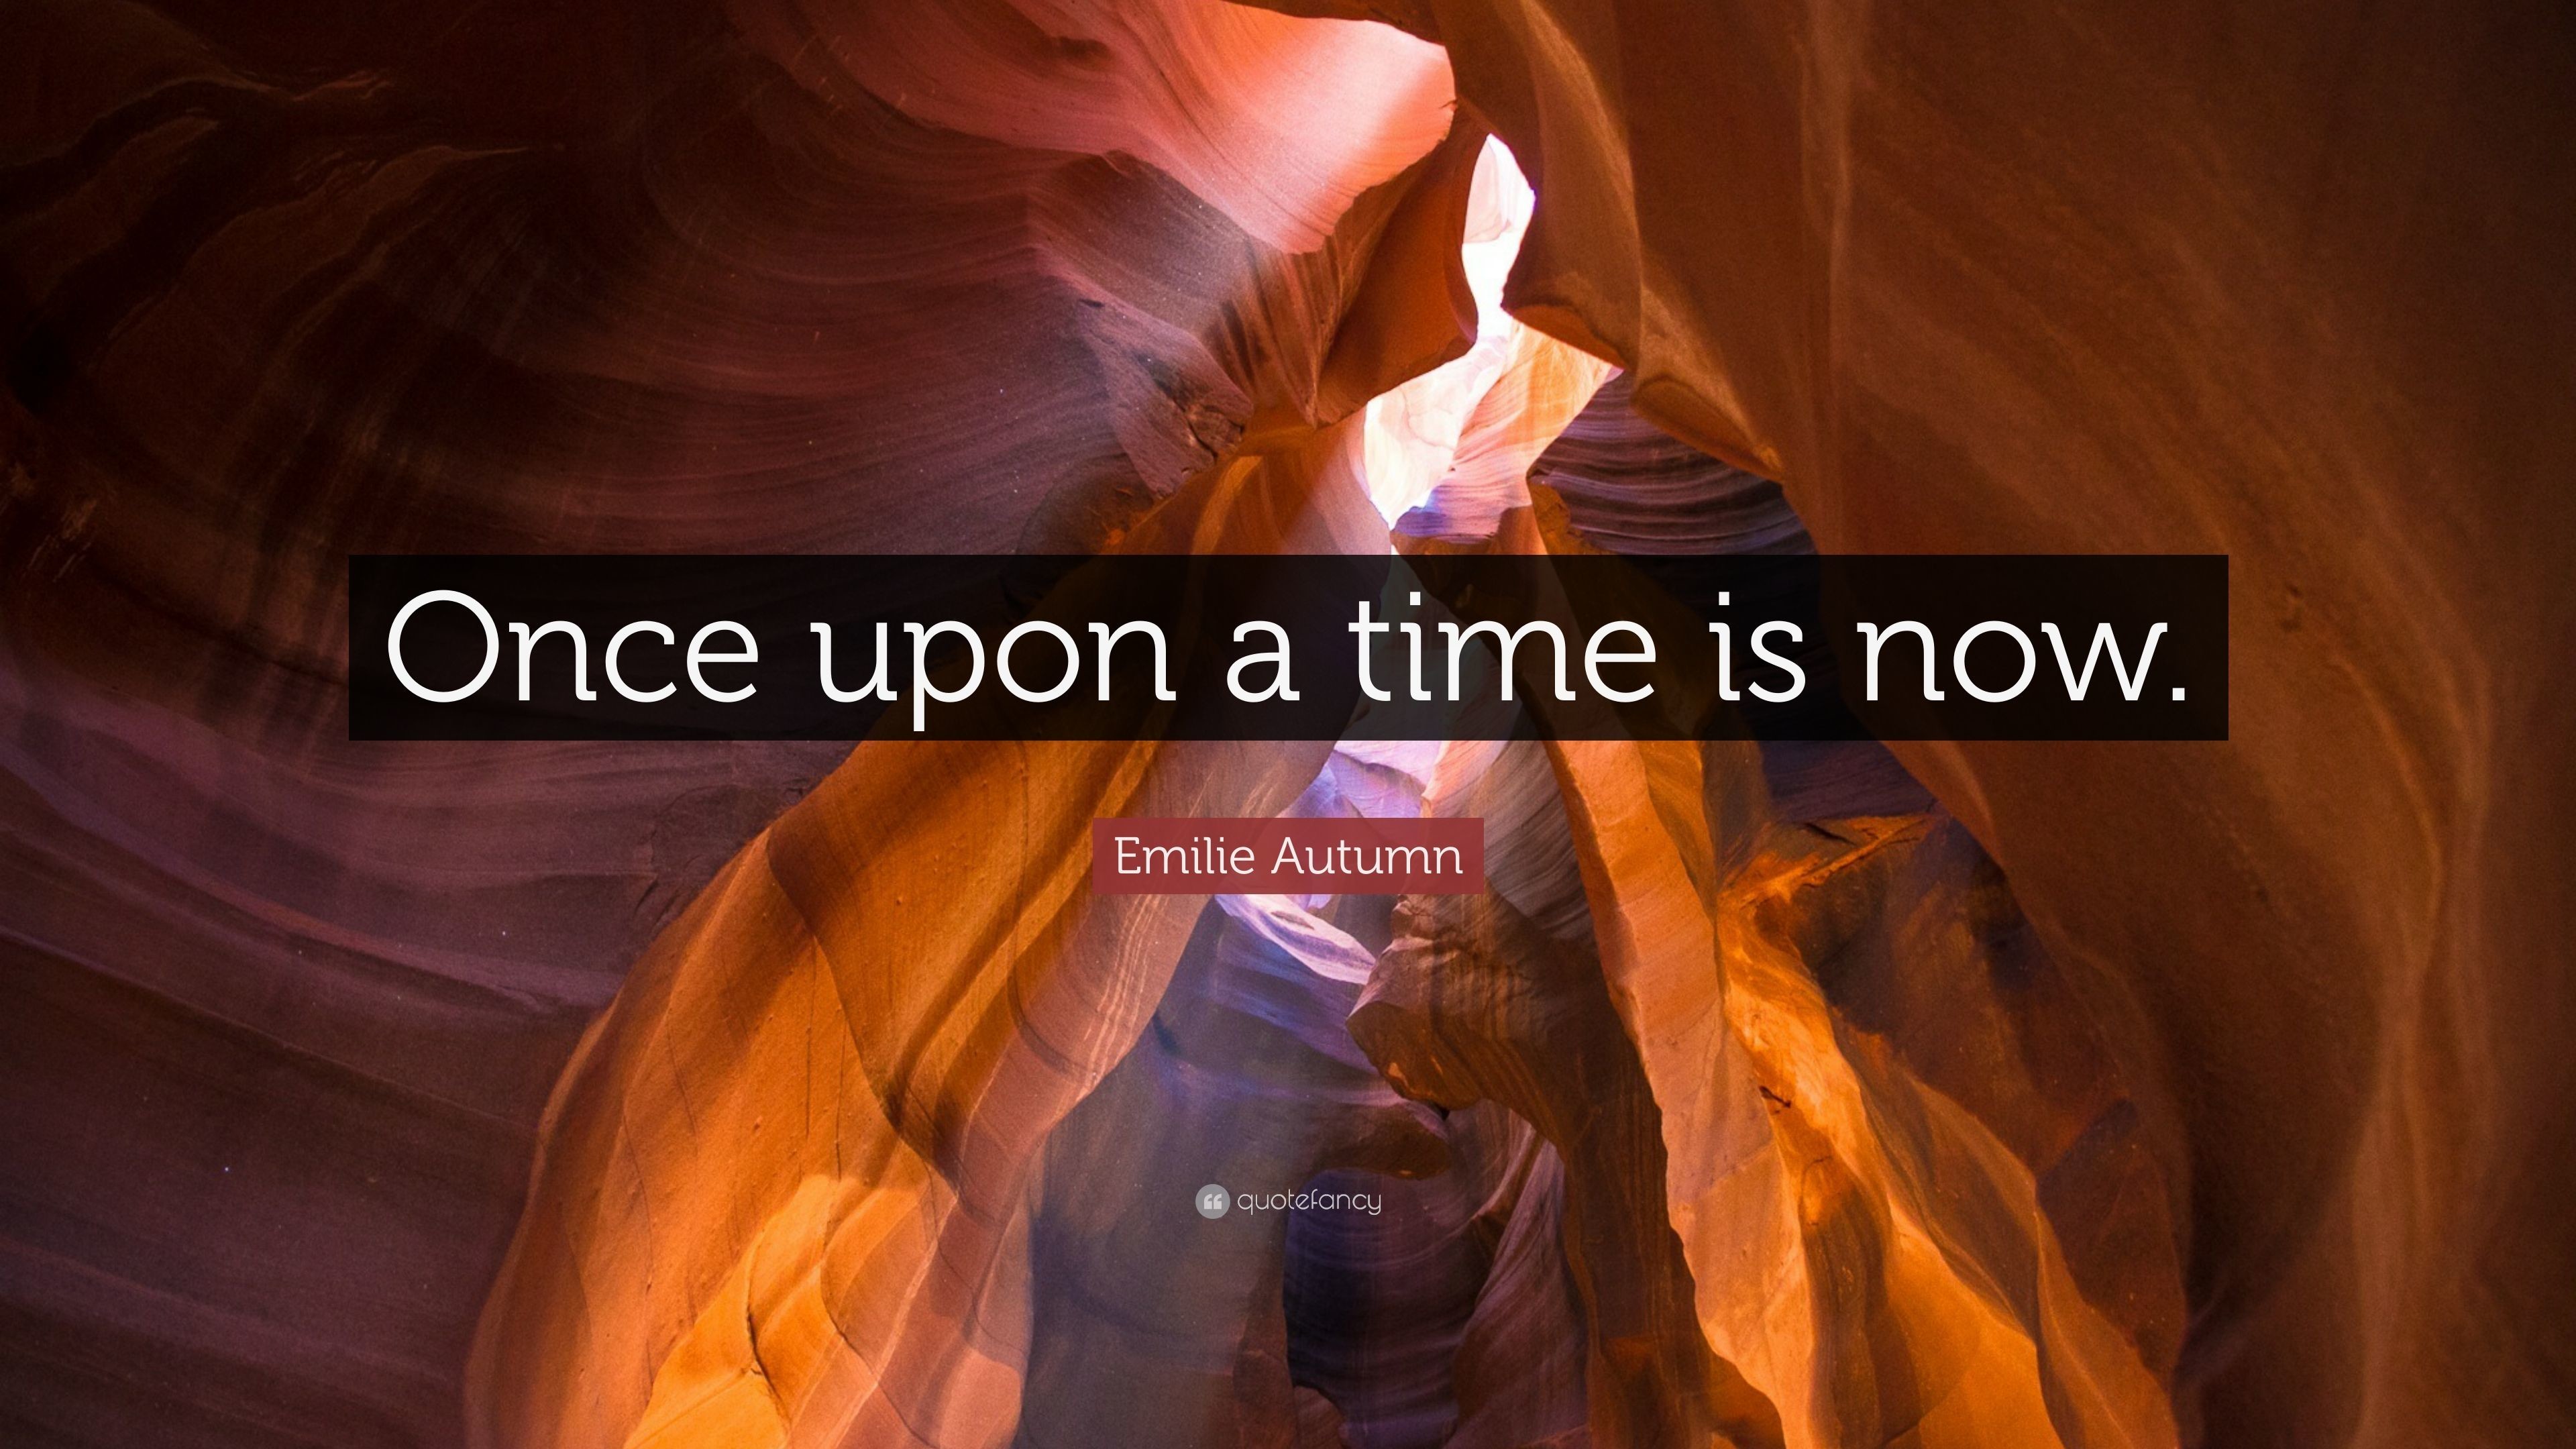 3840x2160 Emilie Autumn Quote: “Once upon a time is now.”